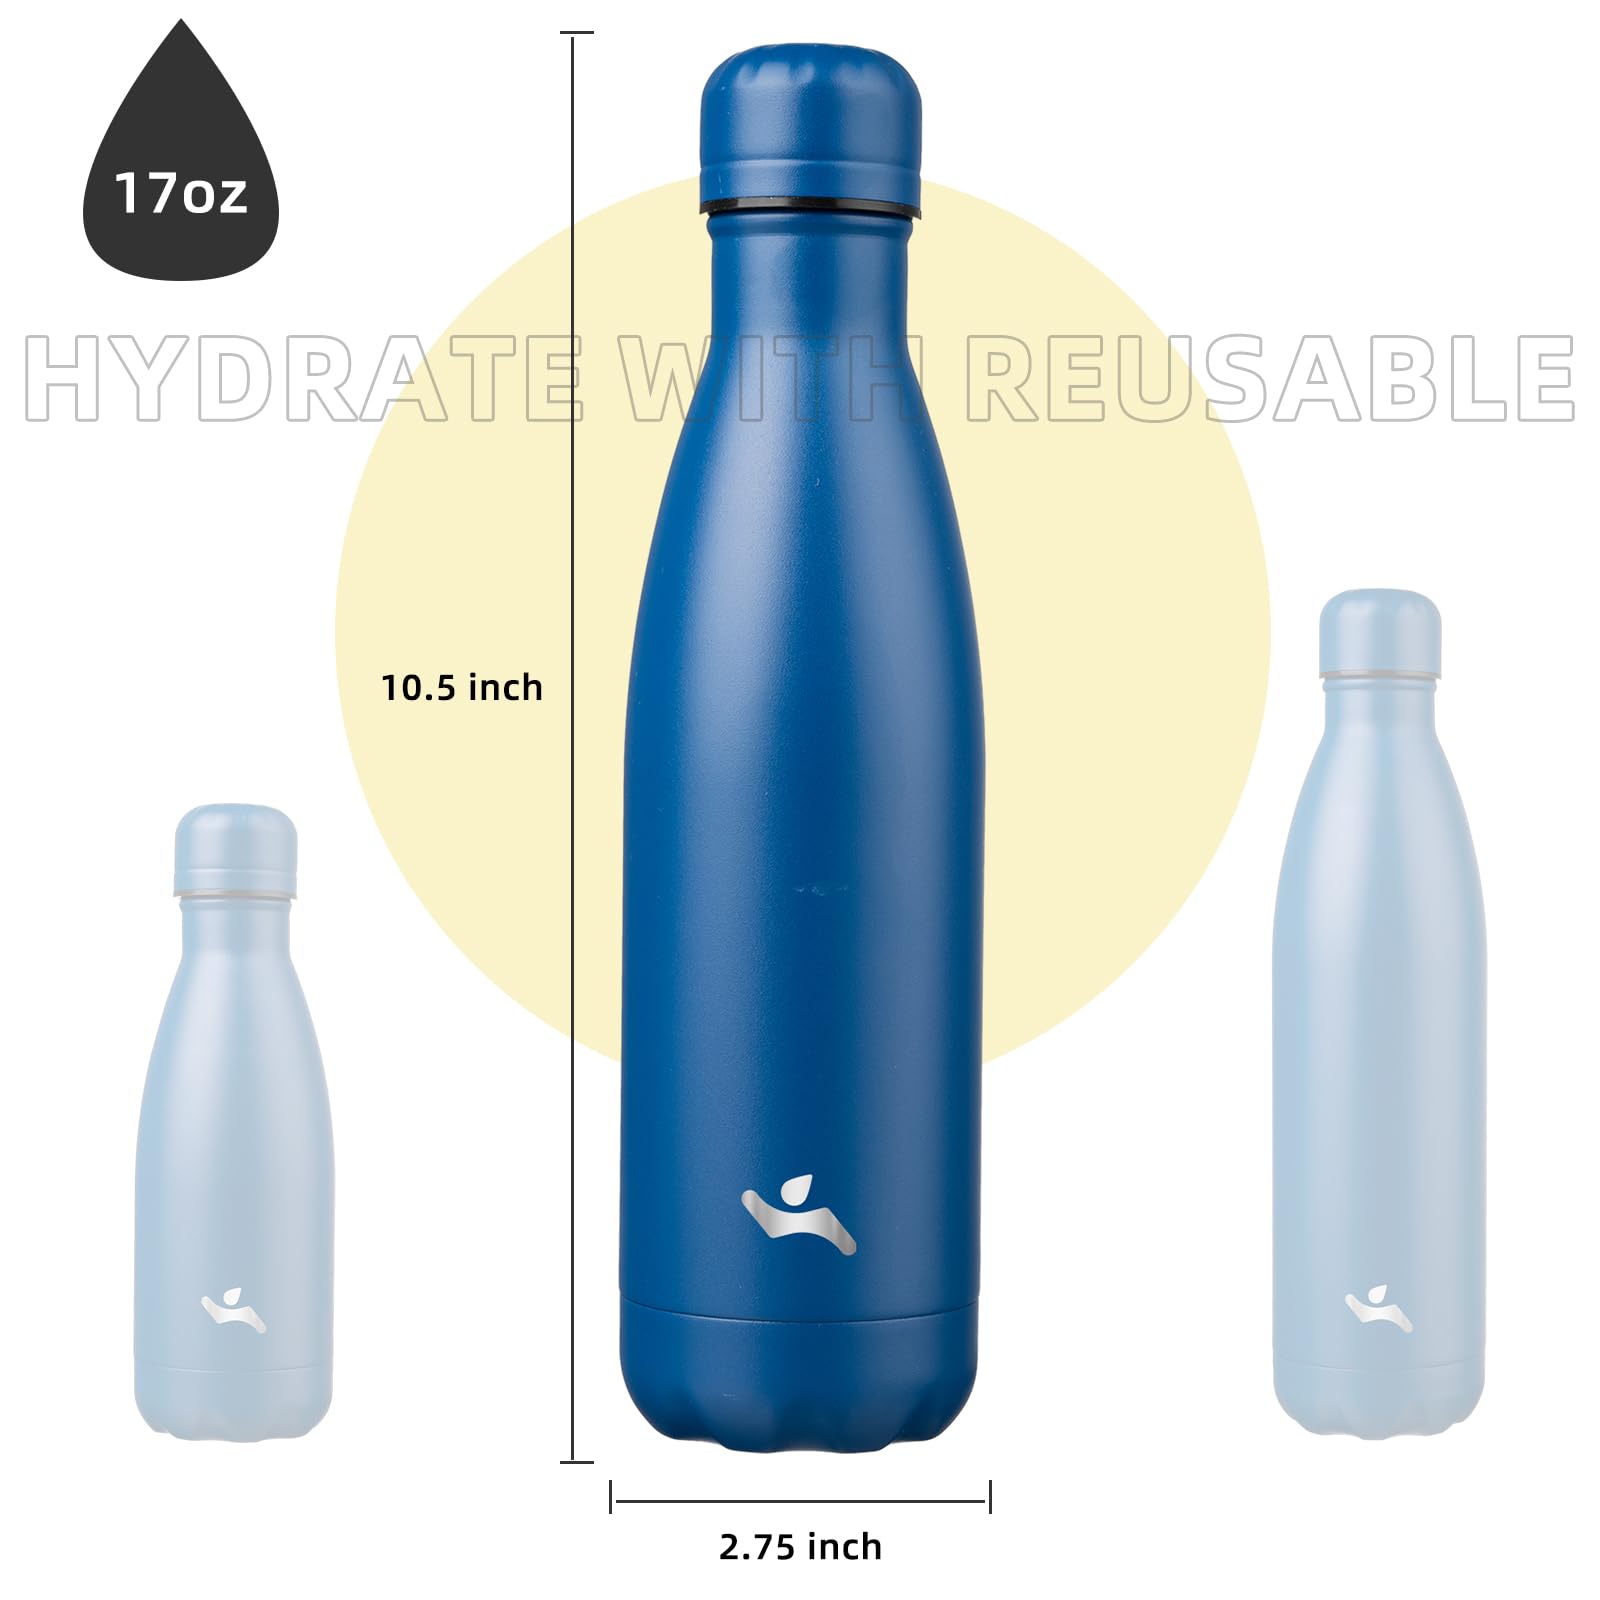 Konokyo Insulated Water Bottles,17oz Double Wall Stainless Steel Vacumm Metal Flask for Sports Travel,Blue